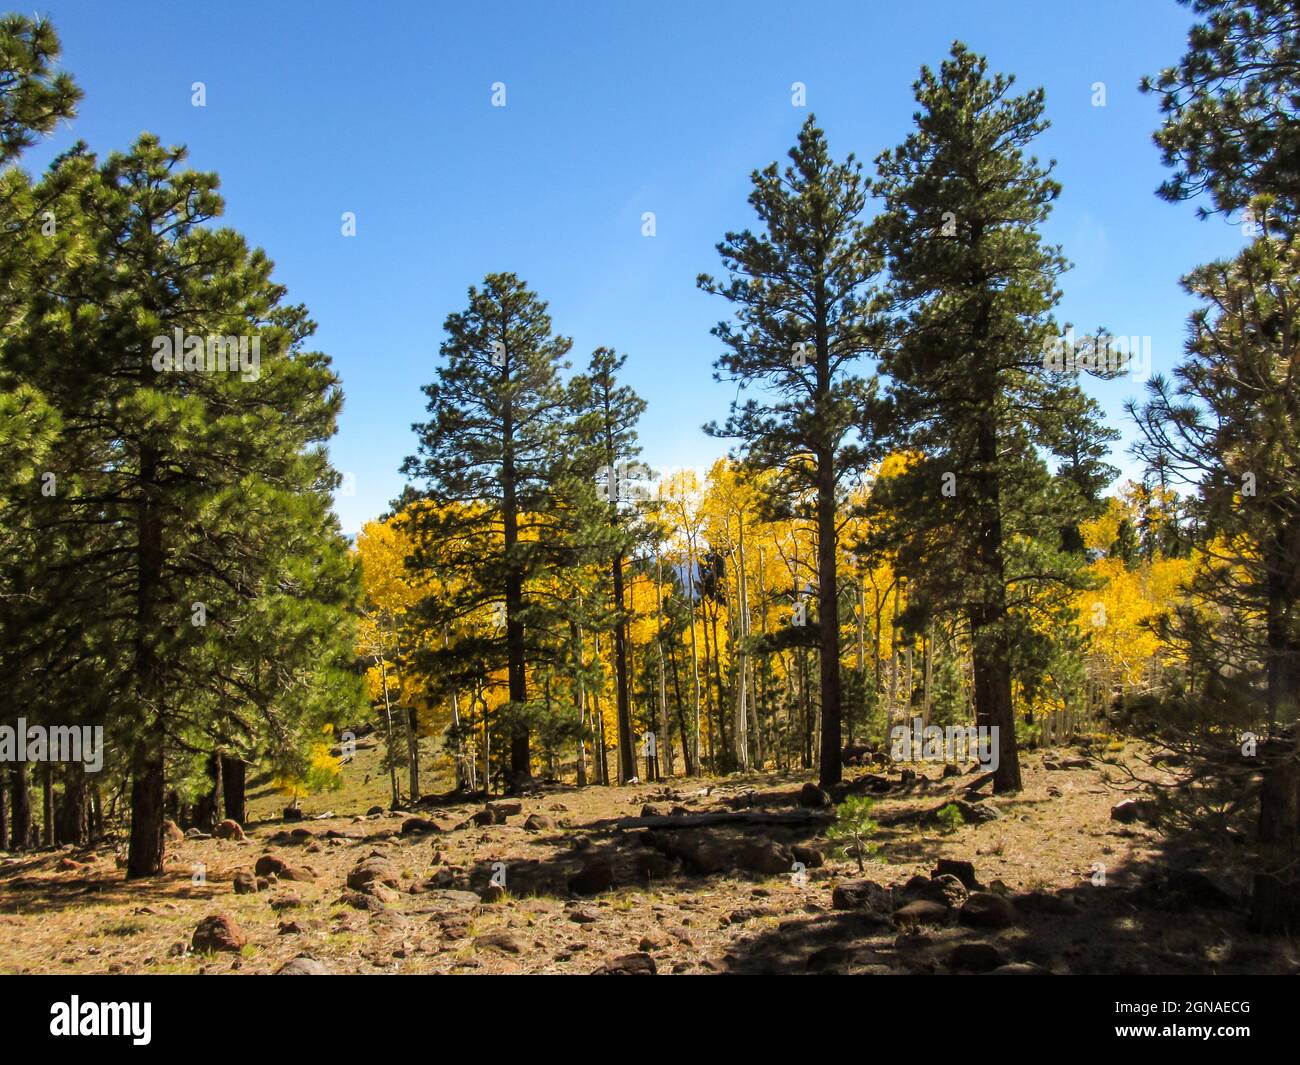 A mixed forest of Aspen, fir and pine trees in the Dixie national forest on the high altitudes of the Aquarius Plateau, Utah, USA, on a sunny autumn d Stock Photo